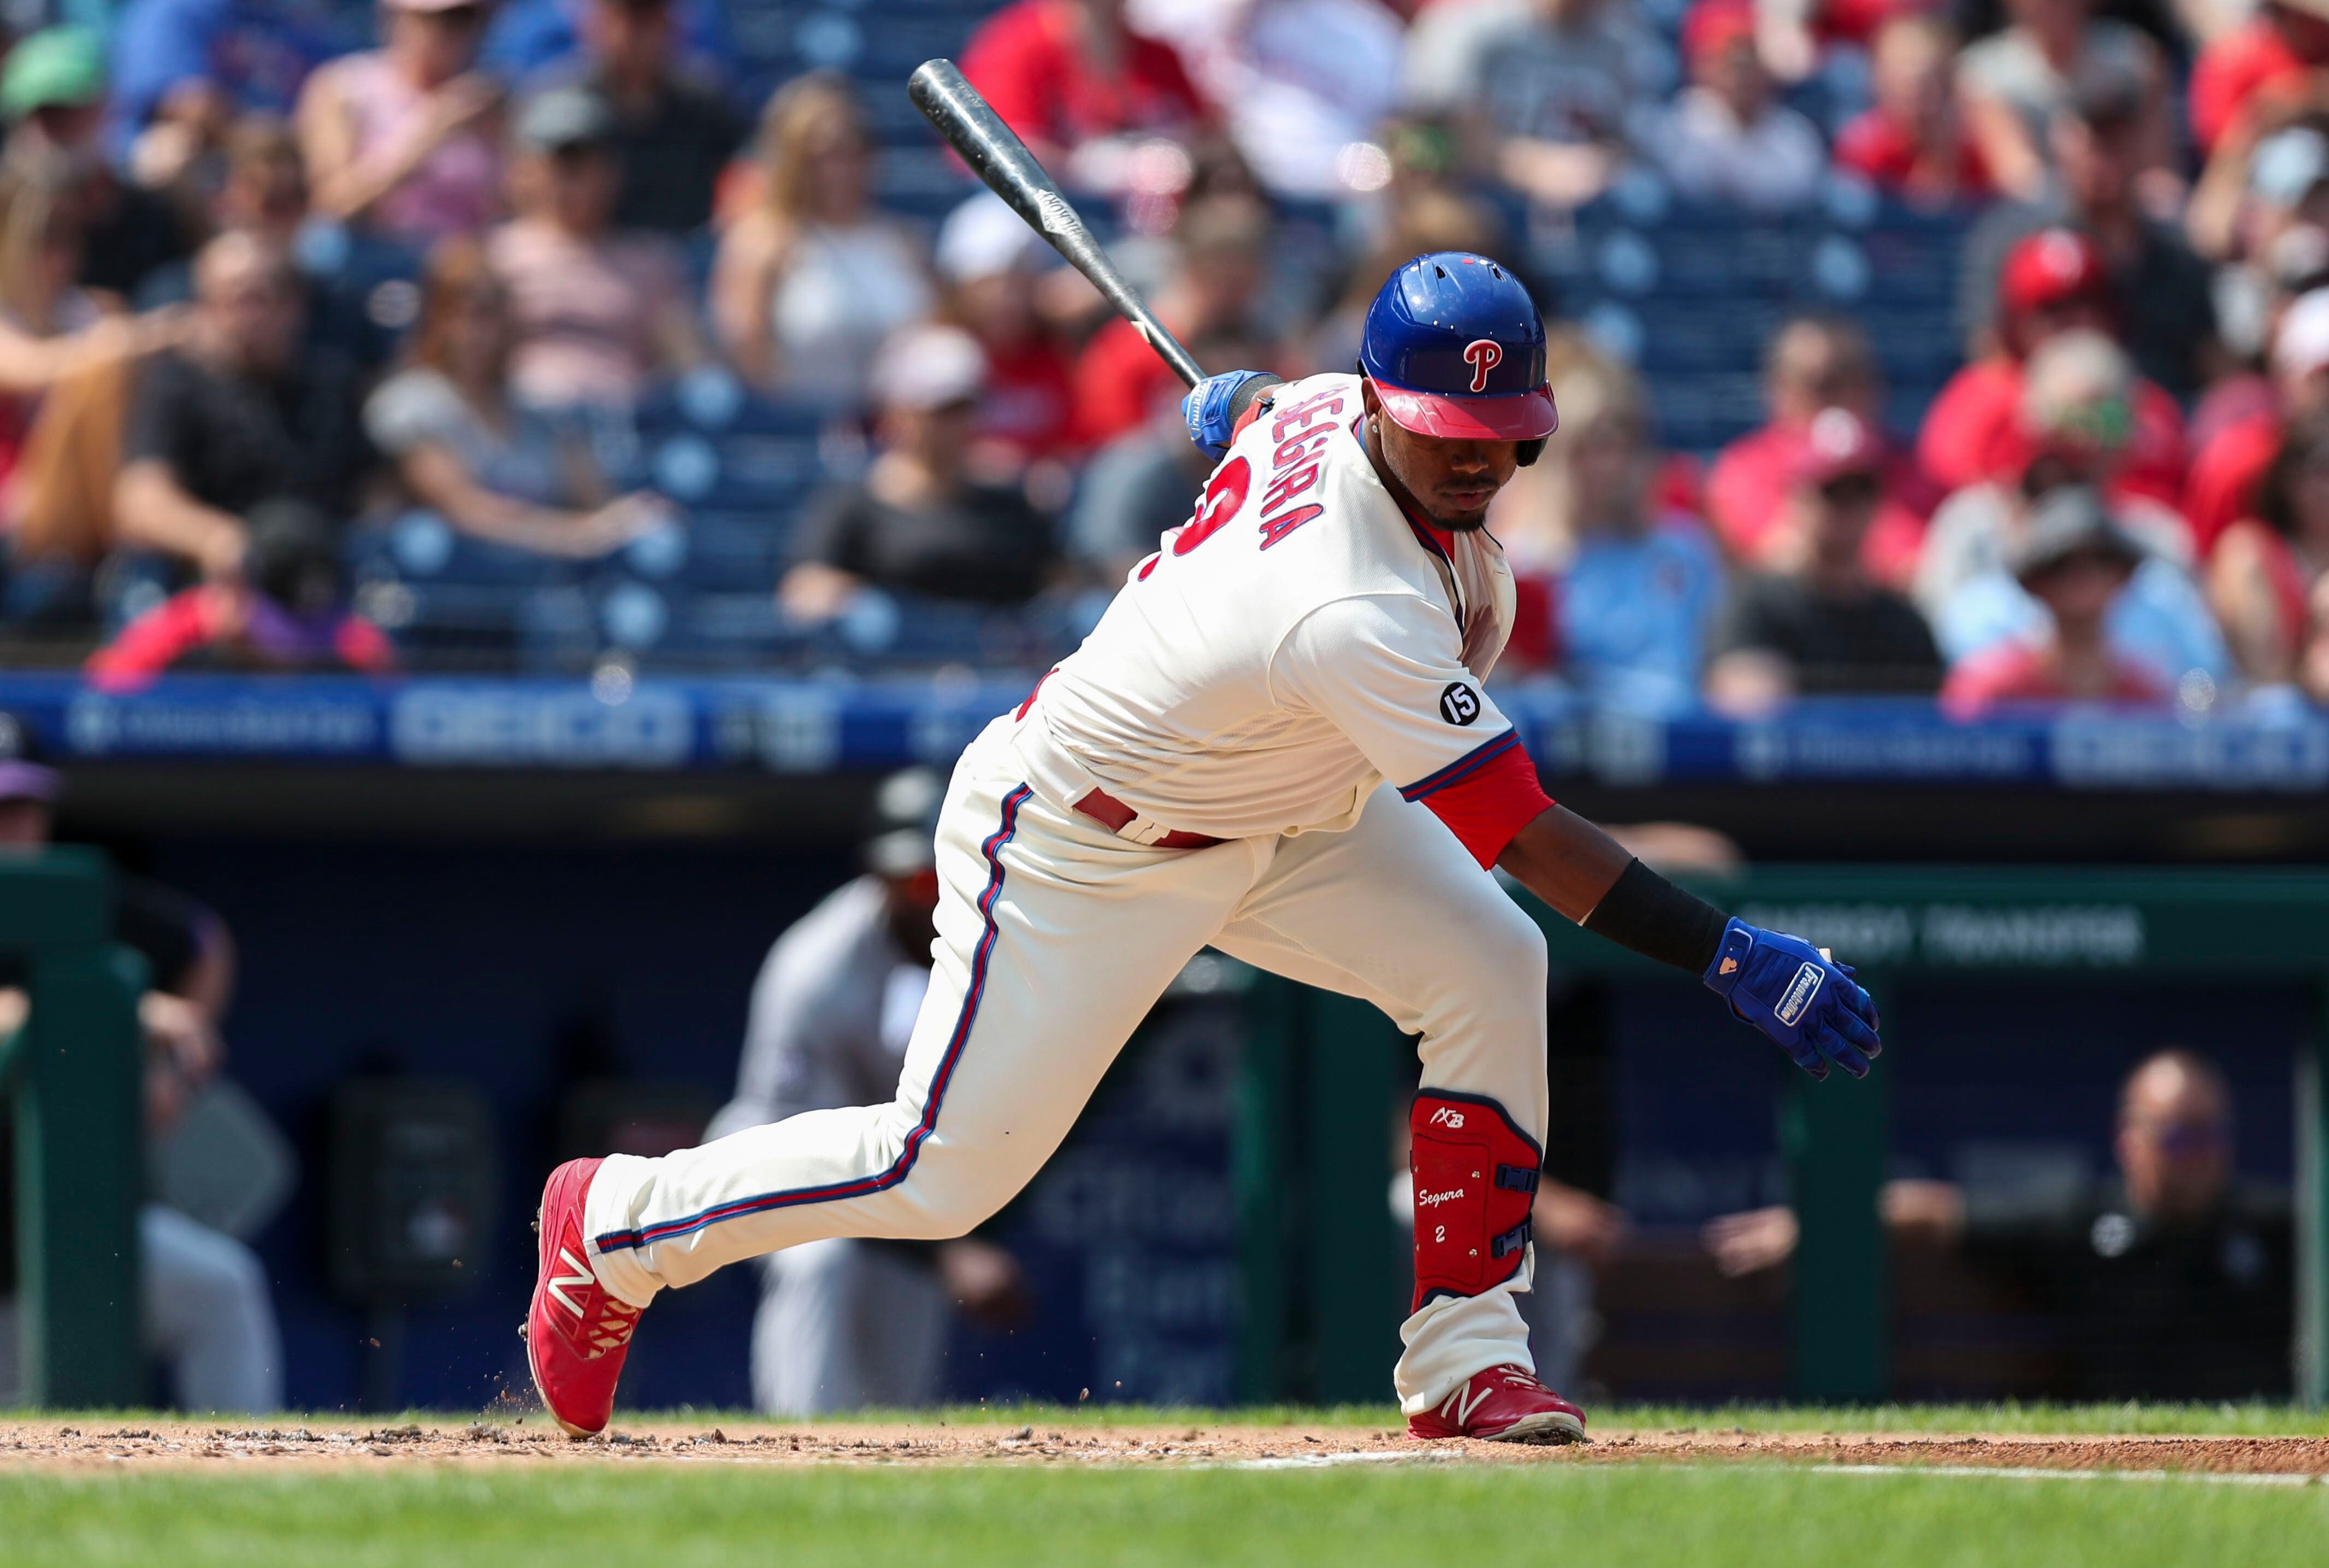 Phillies' Nola loses no-hit bid on homer in 7th against Tigers – WWLP